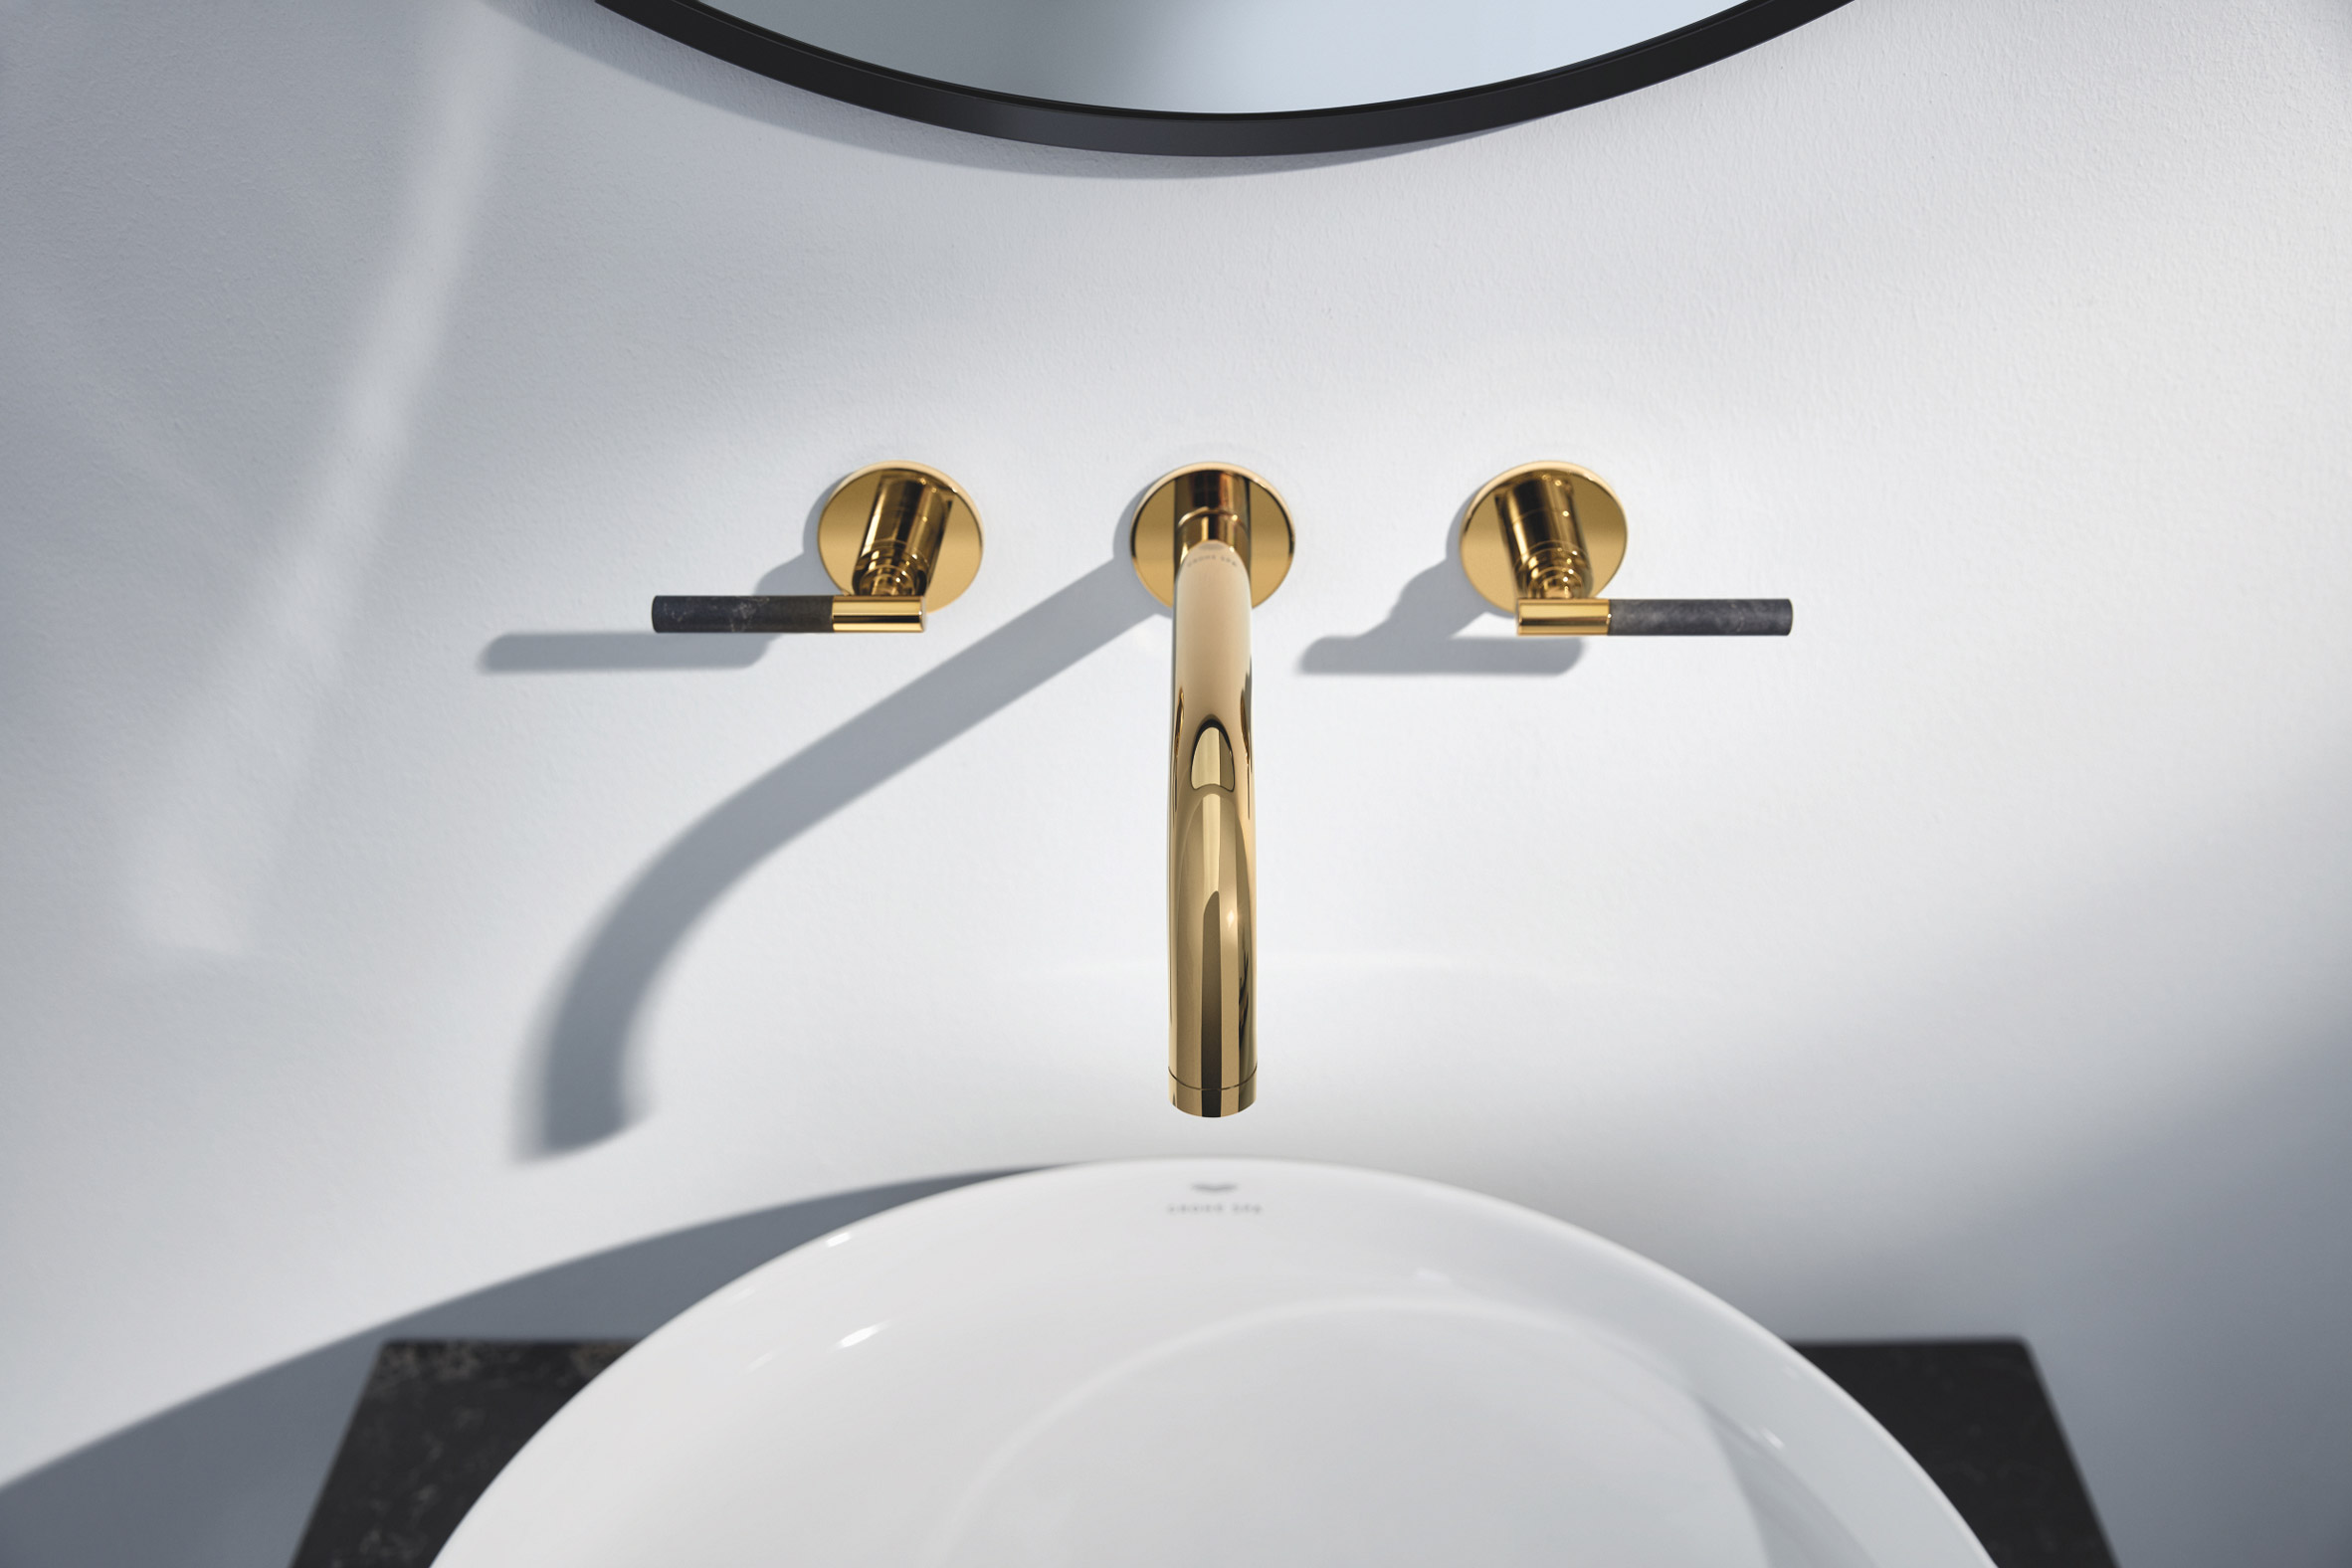 Gold coloured mixer tap above sink